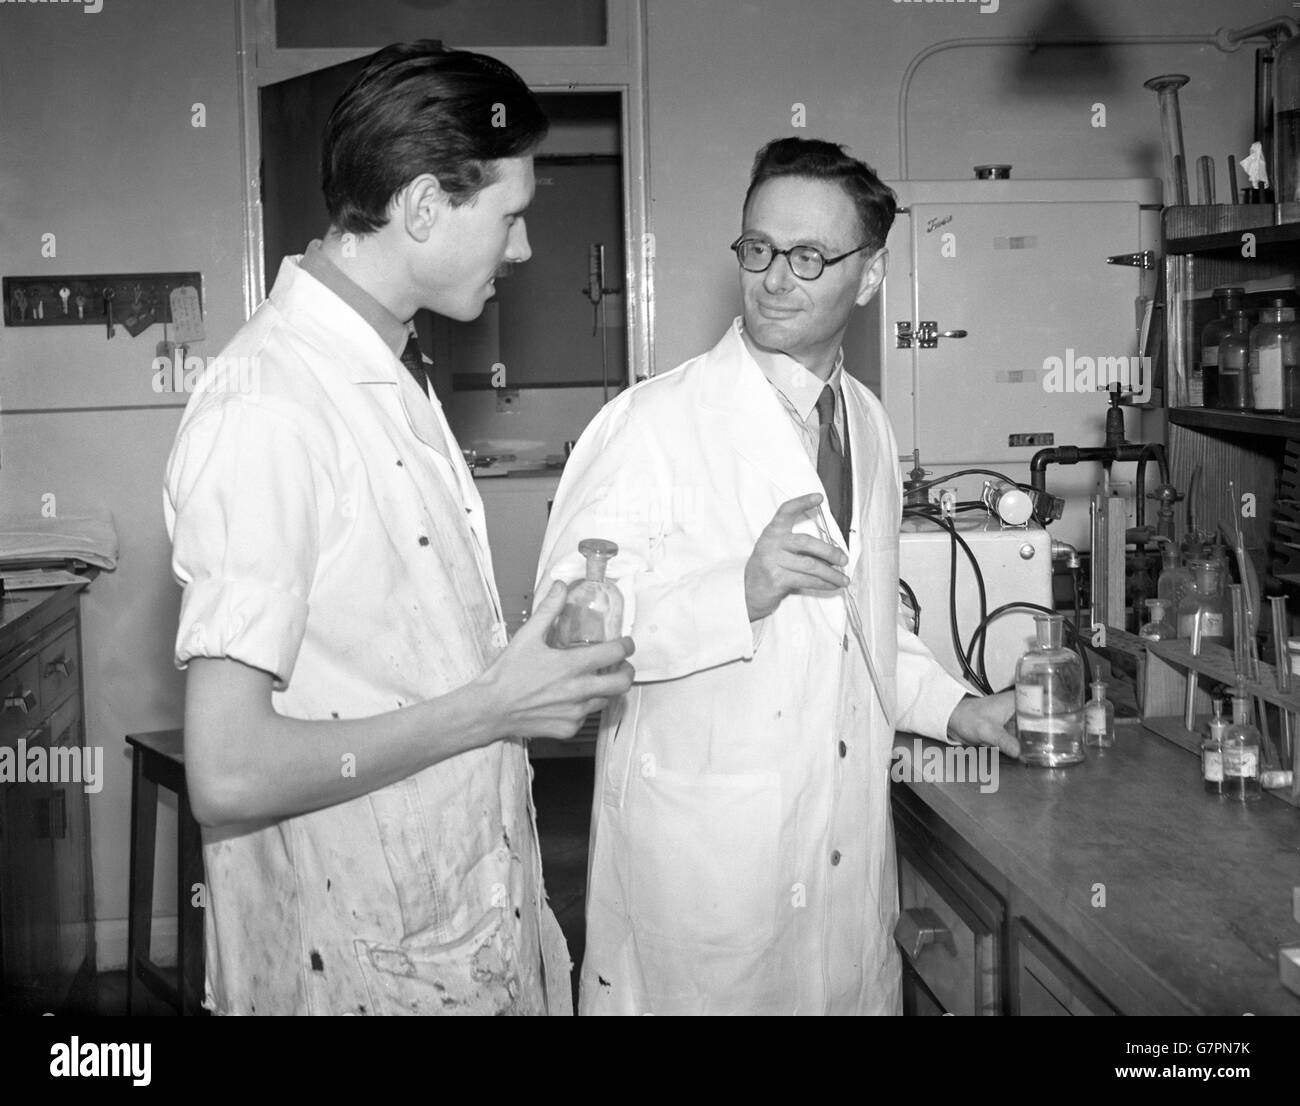 Professor Hans Krebs (r), professor of Bio-Chemistry at Sheffield University, who received the Nobel Prize in Physiology or Medicine for his 'discovery of the citric acid cycle.'. He shared the Nobel Prize with Fritz Lipmann. Professor Hans Krebs was born in Germany and came to Britain in 1933. Here he is pictured talking to a student at Sheffield University. Stock Photo